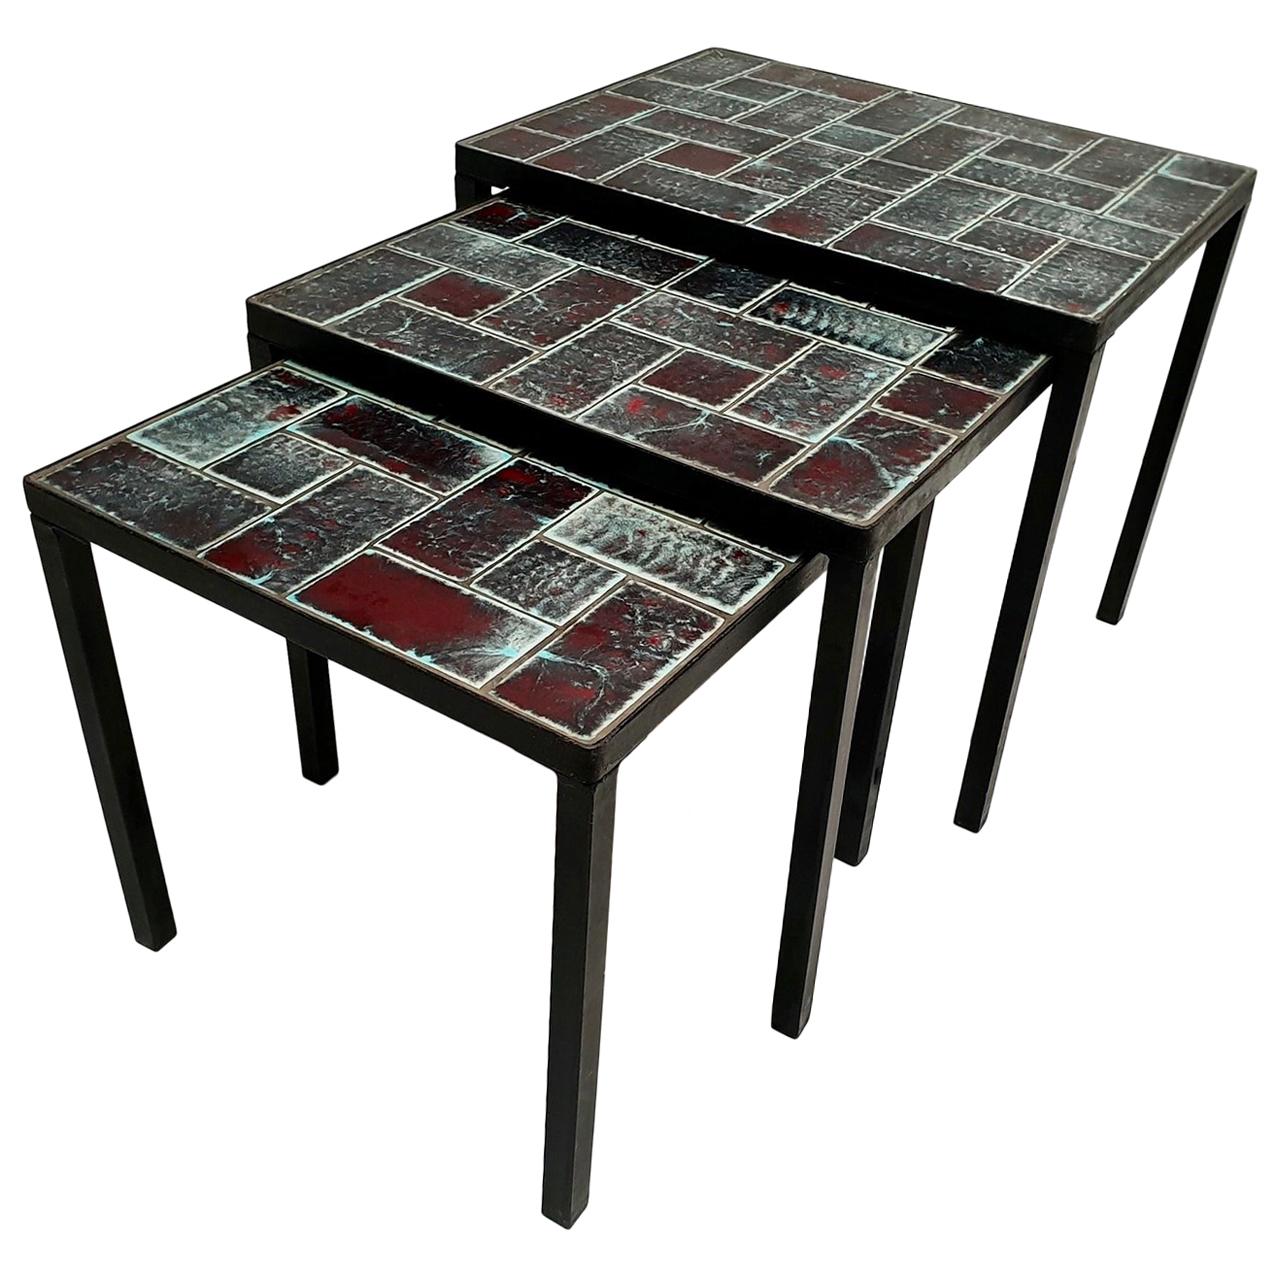 Three Mid-Century Black Wrought Iron Ceramic Tile Stacking Tables circa 1960 For Sale